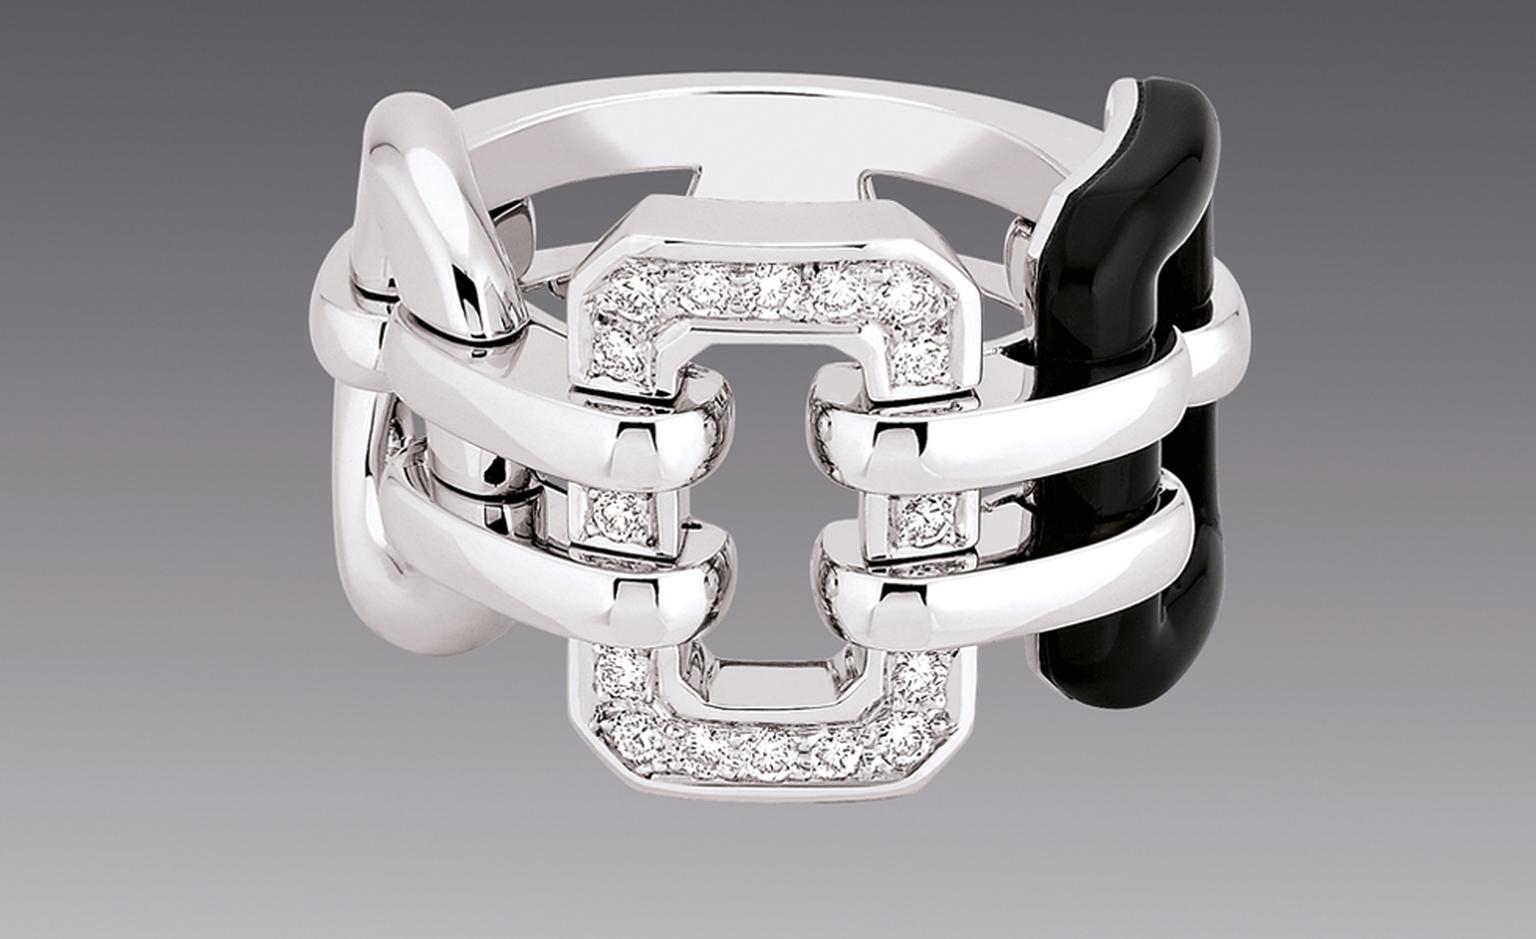 CHANEL, The Premiere in 18kt white gold and onyx premiere ring. £4,225